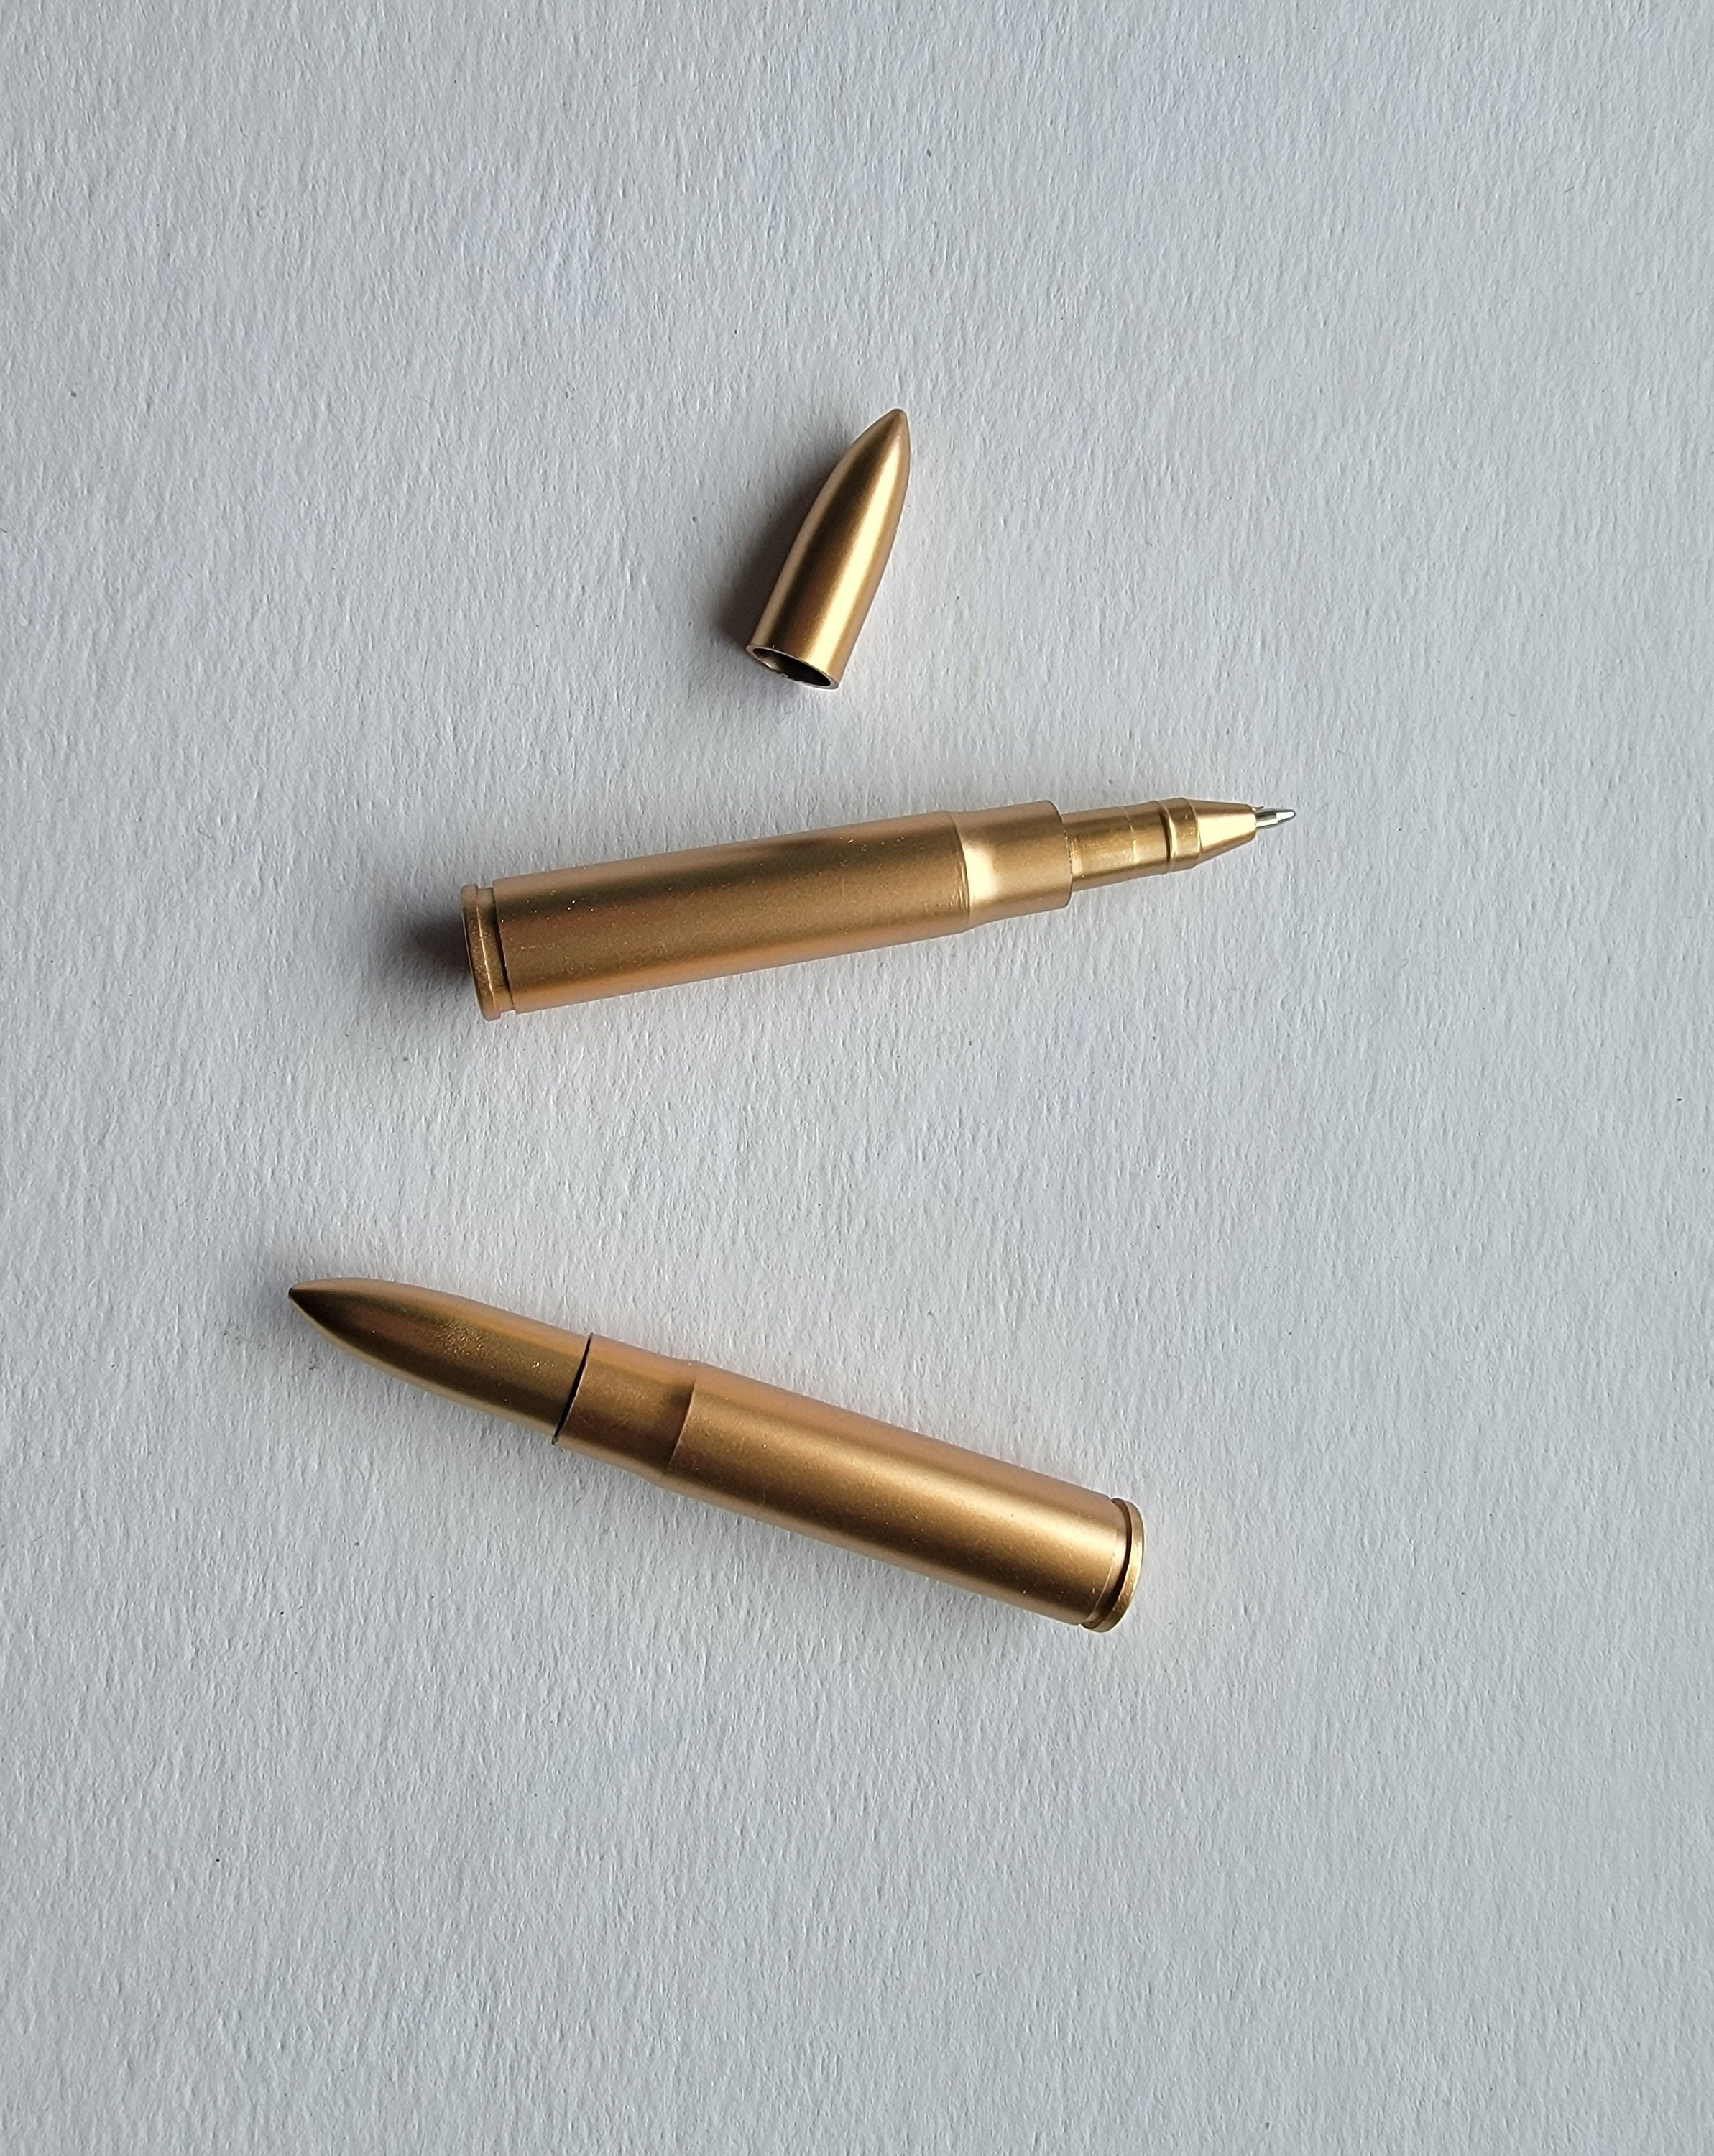 Bullet Pen in Personalized Wooden Gift Box - Personalized .50 cal BMG –  Brass Honcho